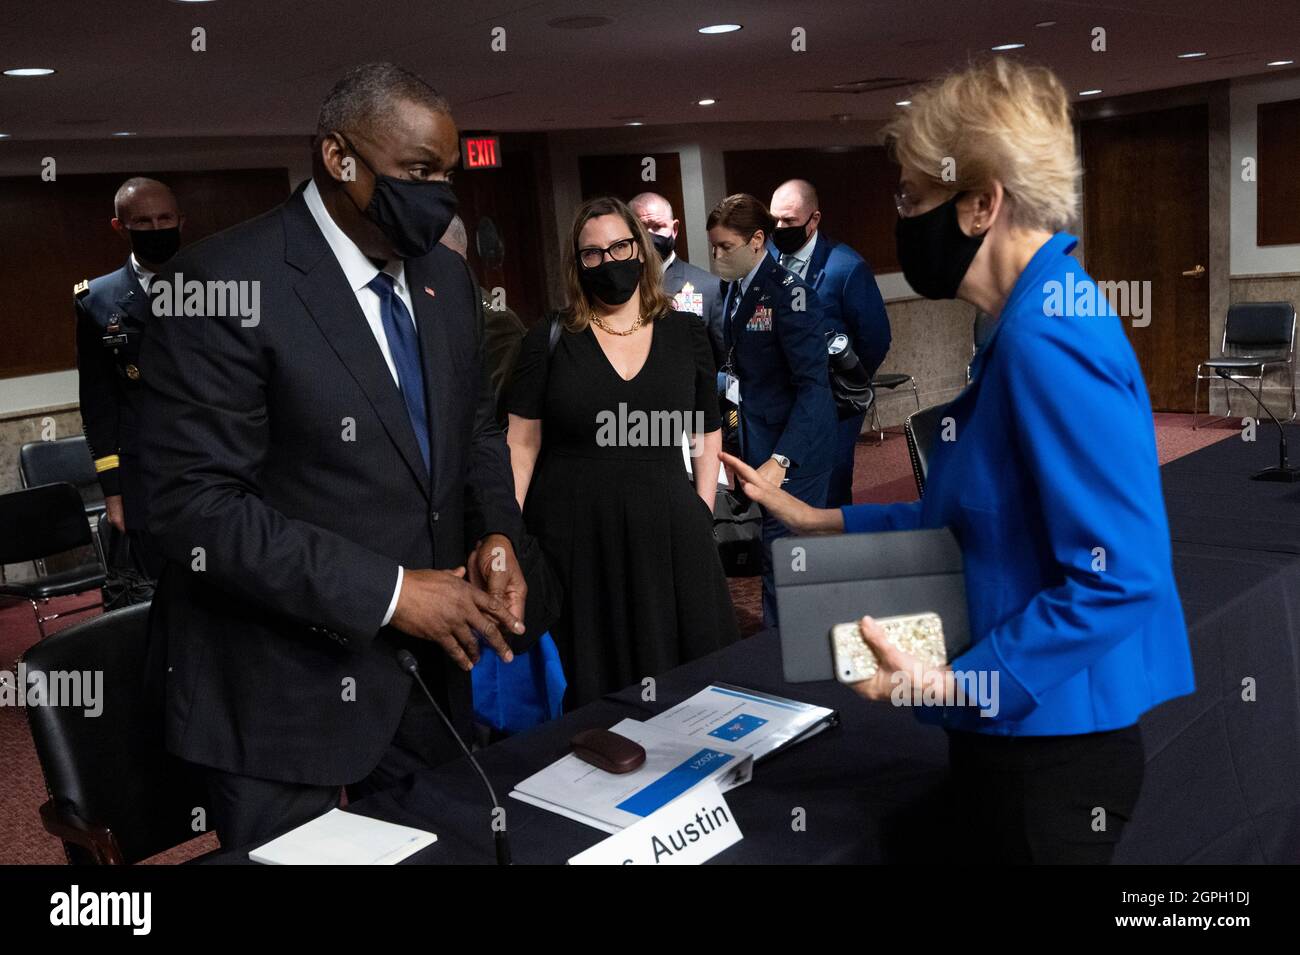 Washington, United States Of America. 28th Sep, 2021. Washington, United States of America. 28 September, 2021. U.S. Secretary of Defense Lloyd Austin, left, speaks with Senator Elizabeth Warren of Massachusetts, before testifying before the Senate Armed Services Committee on the withdrawal from Afghanistan September 28, 2021 in Washington, DC Credit: Chad McNeeley/DOD/Alamy Live News Stock Photo